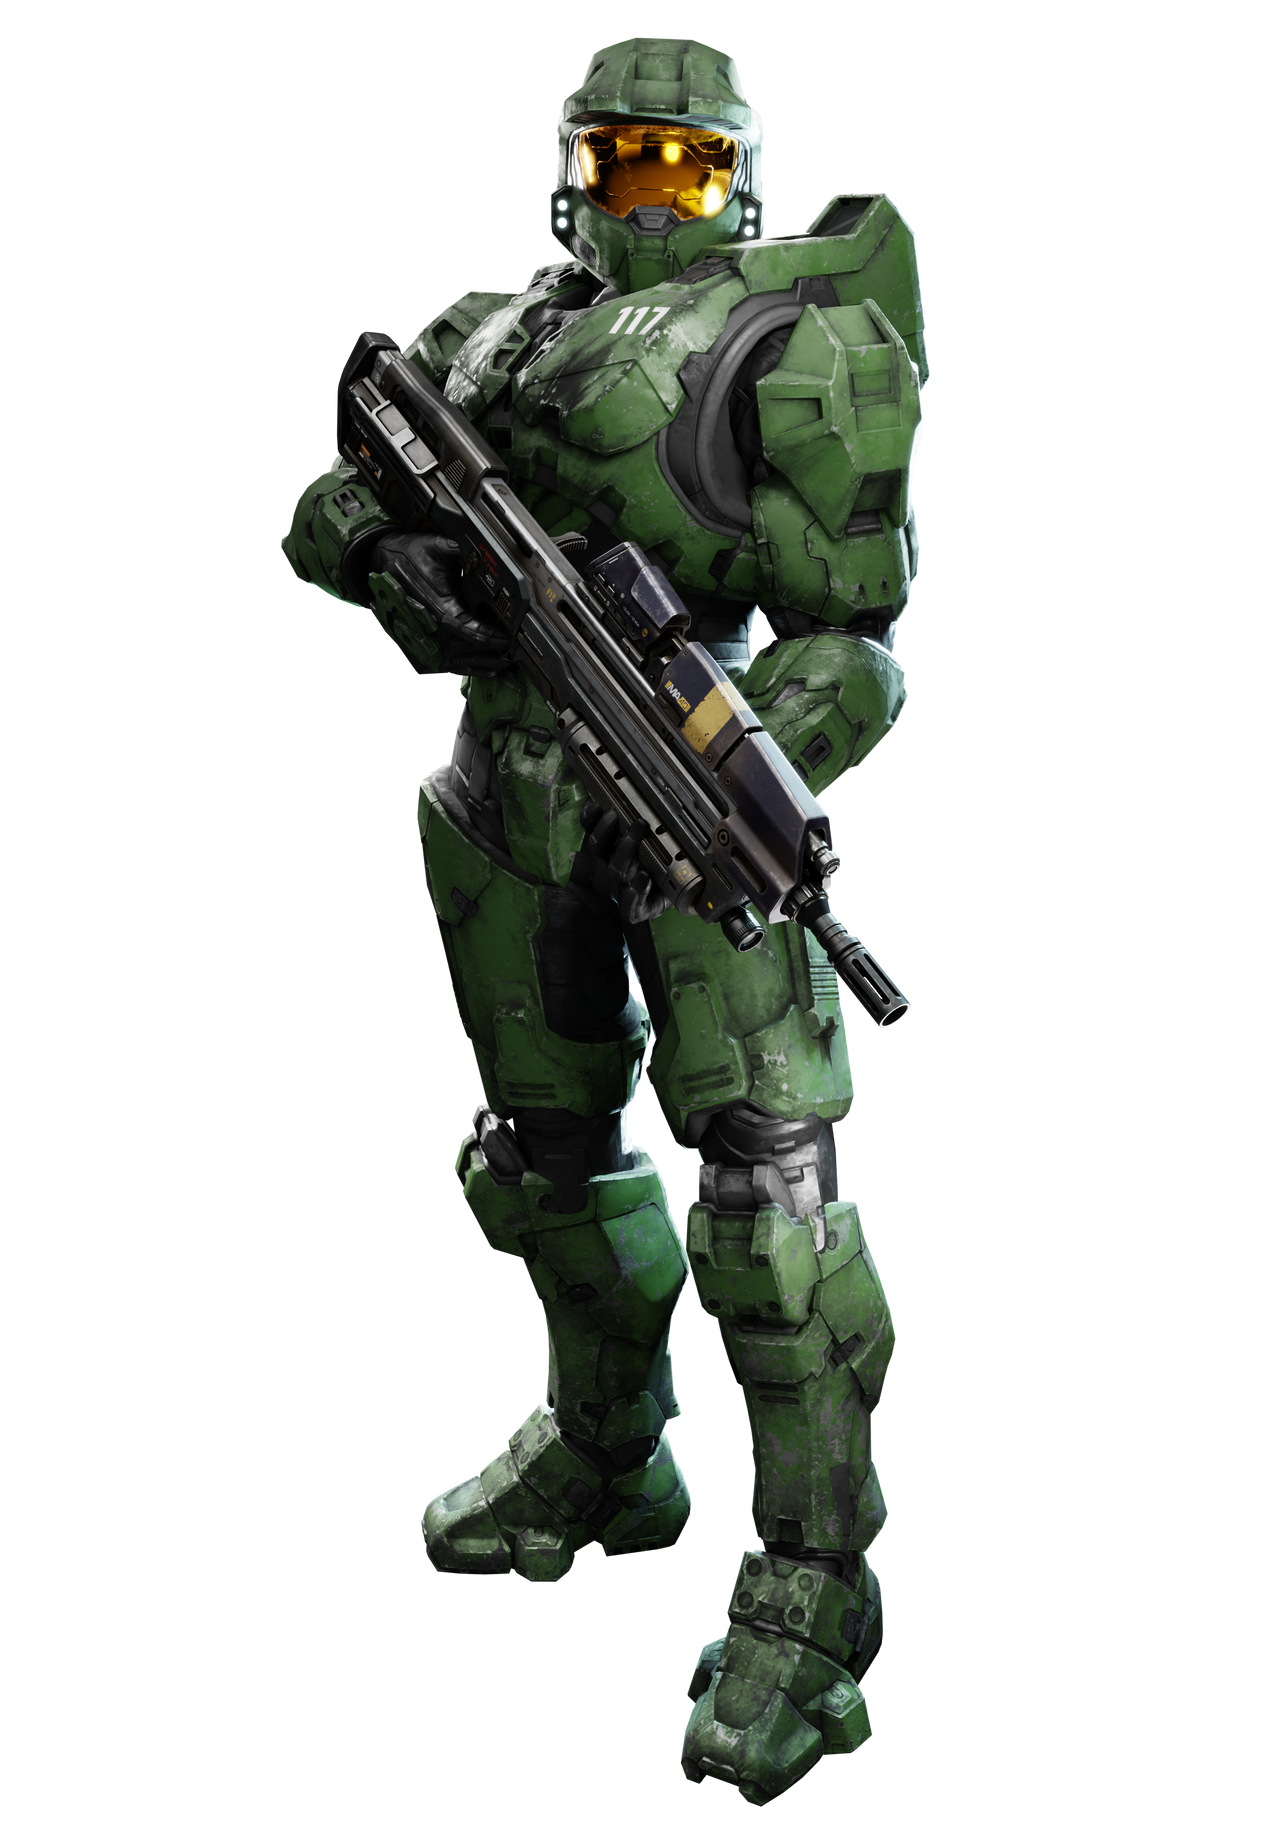 Master Chief Halo Infinite with Halo 4 render pose by RuVKun on DeviantArt